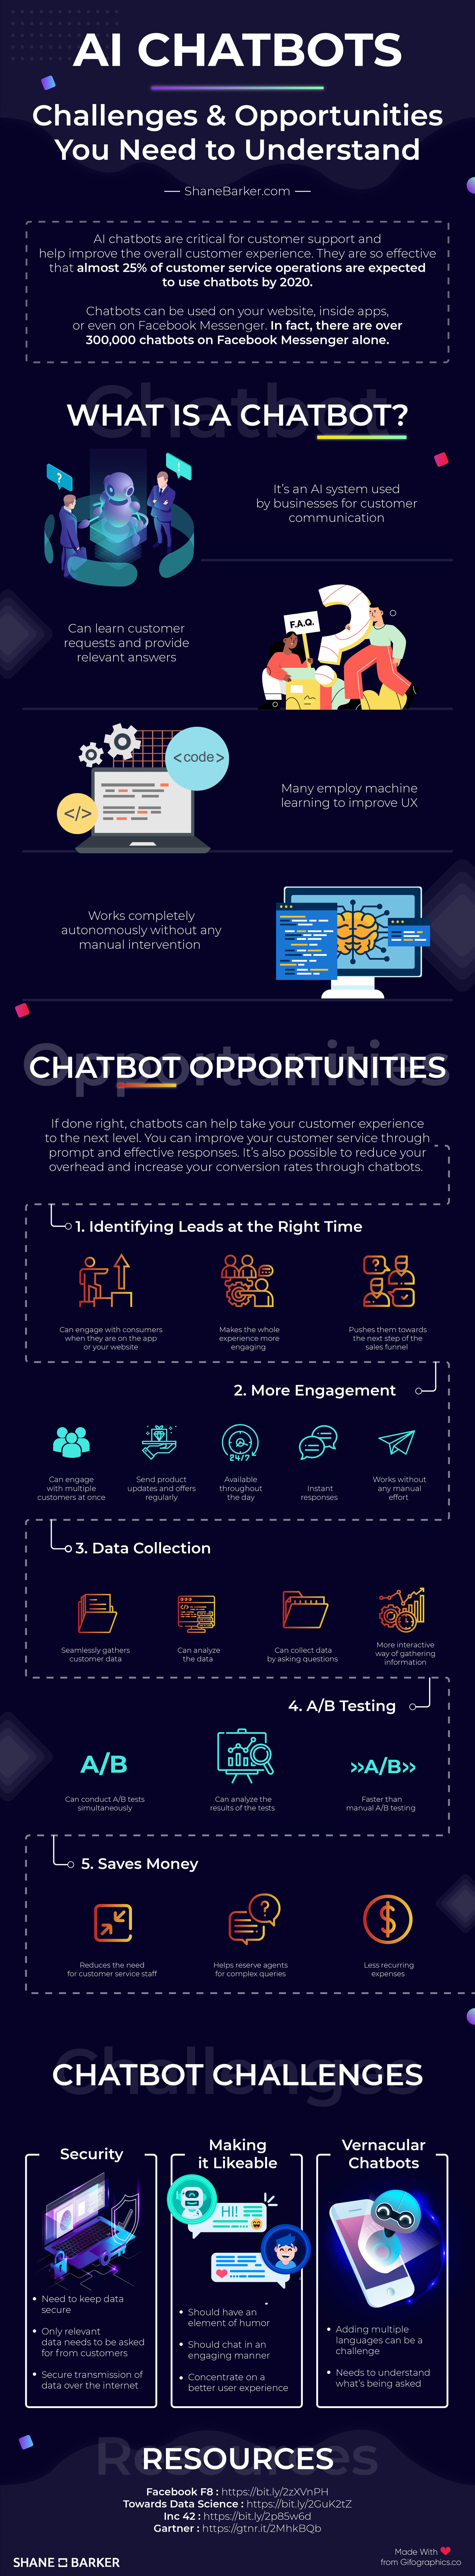 Insights into AI chatbots and the challenges and opportunities it poses